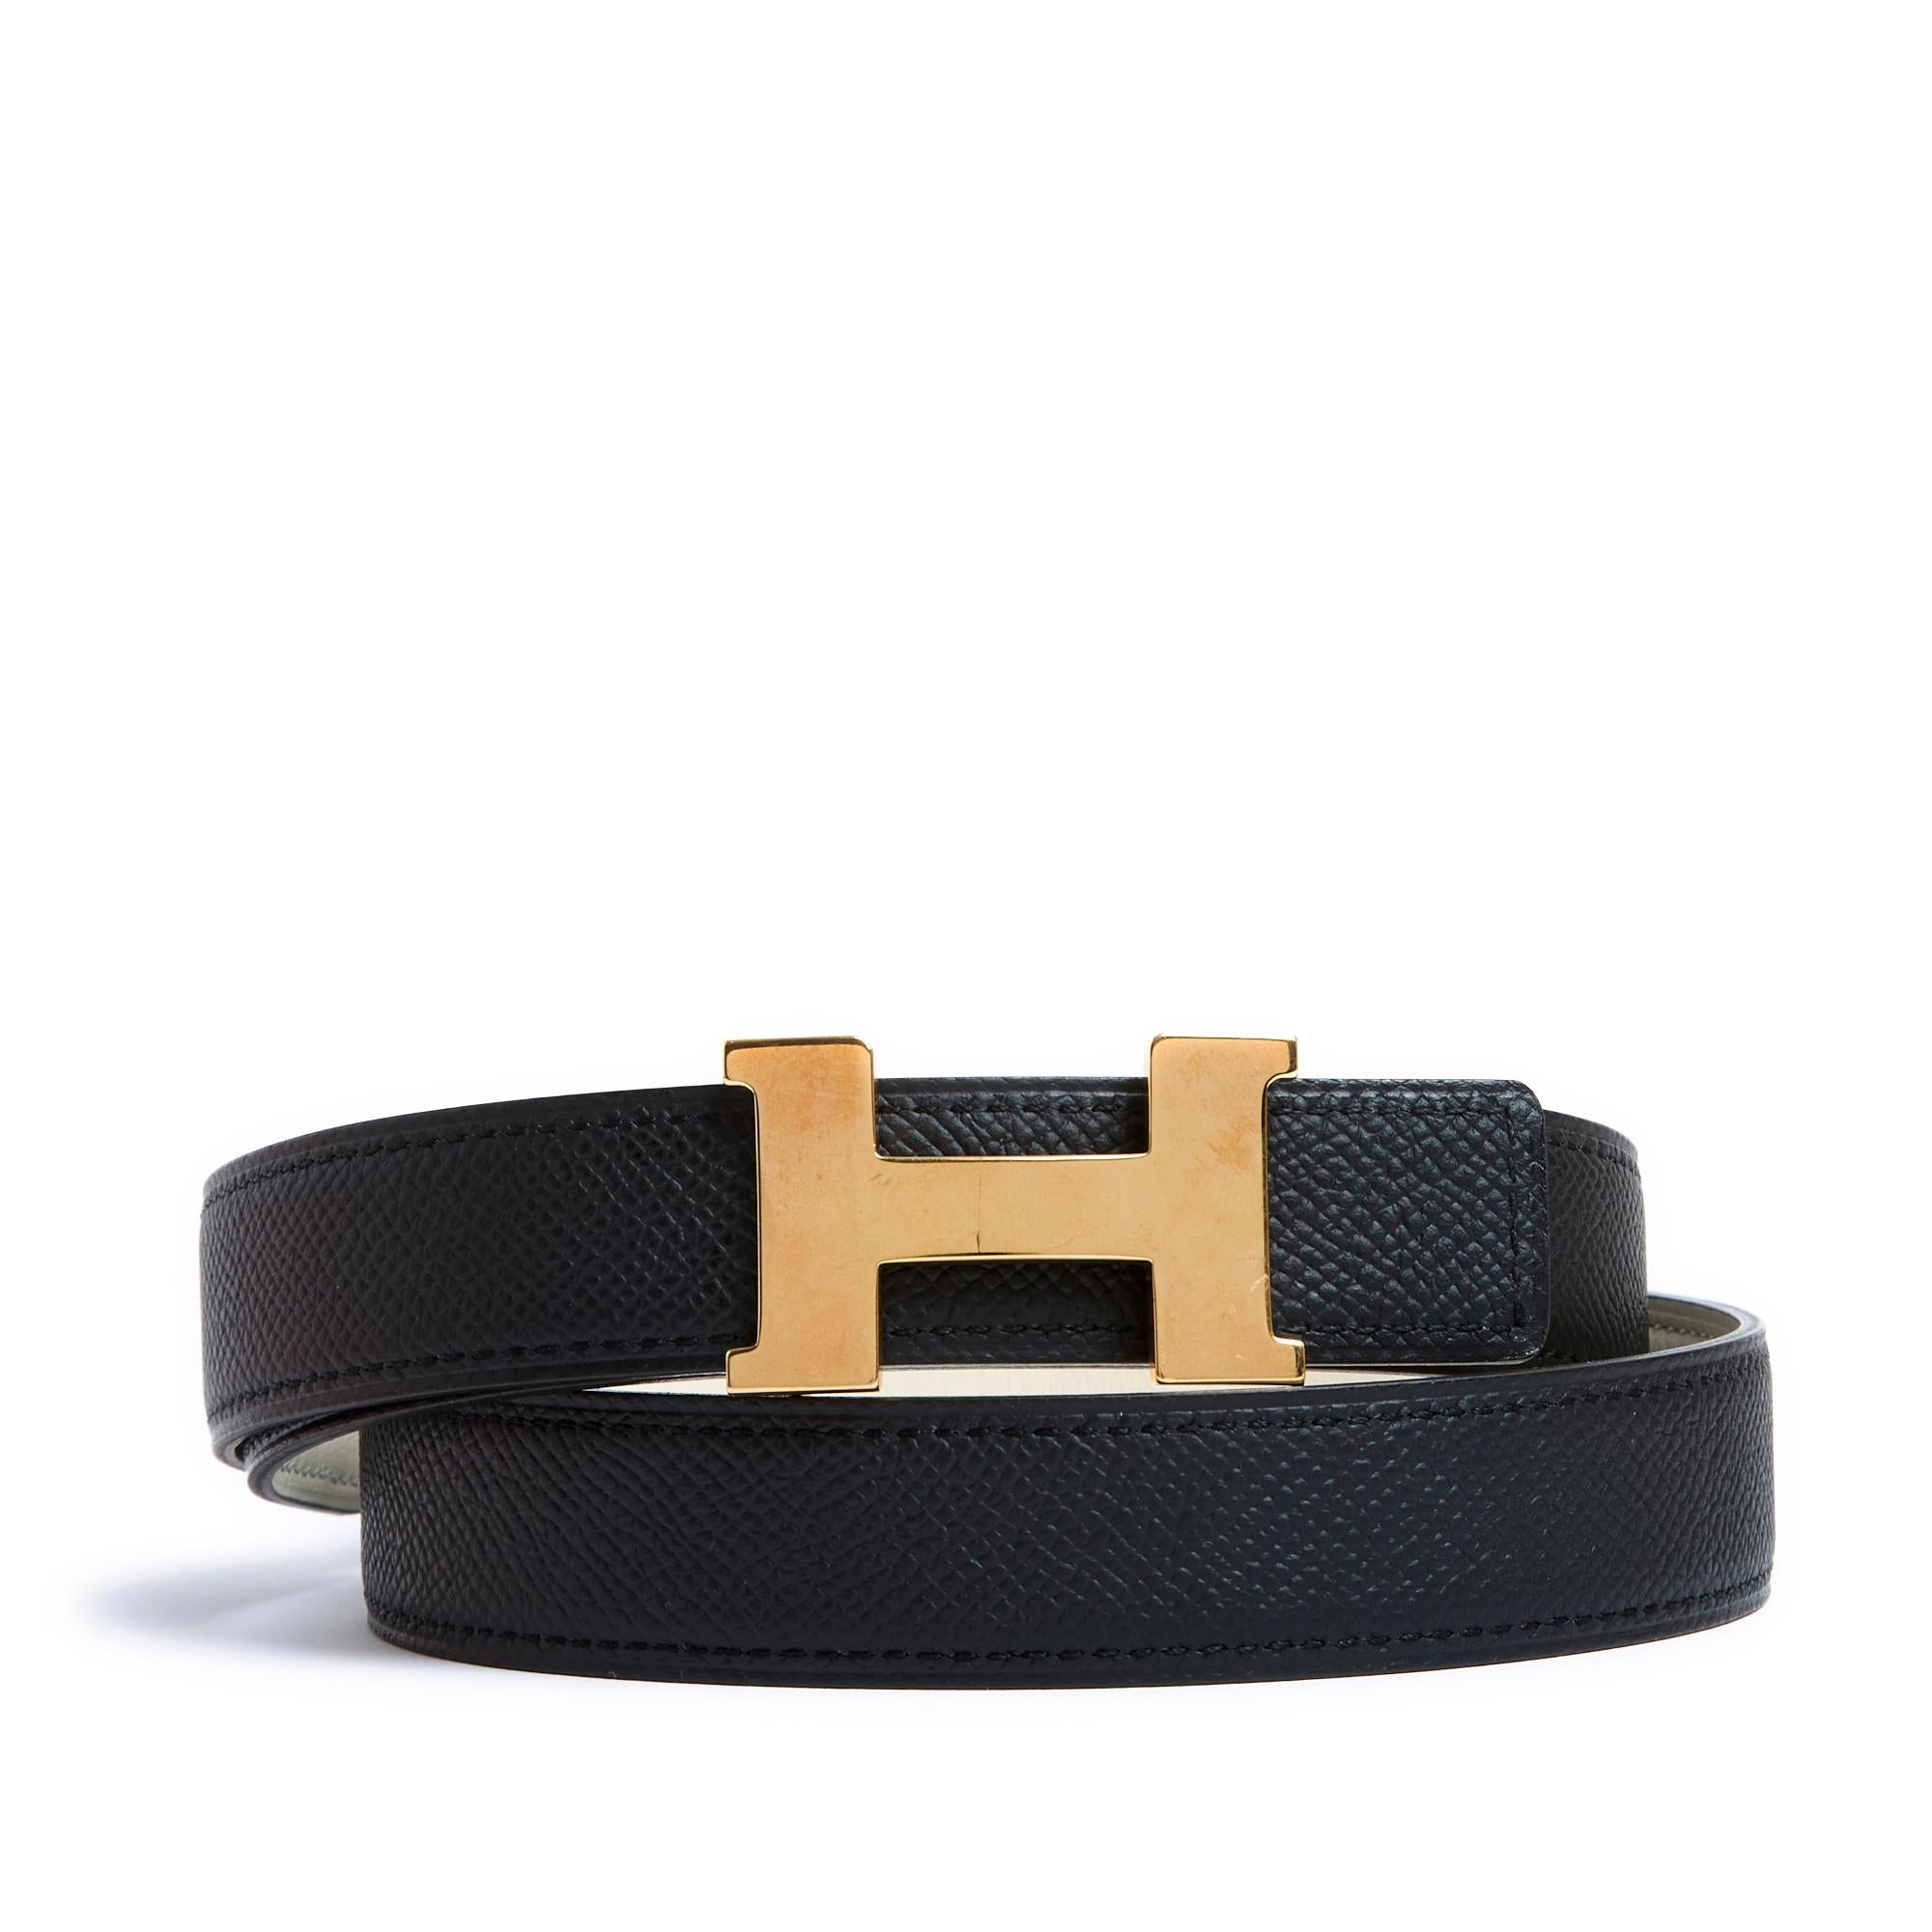 Hermès model A Composer belt including a Constance model belt buckle in rose gold-plated metal and a reversible black leather link on one side and ecru cream on the other, all delivered in its original box. Size 80: total length of the link 95 cm,